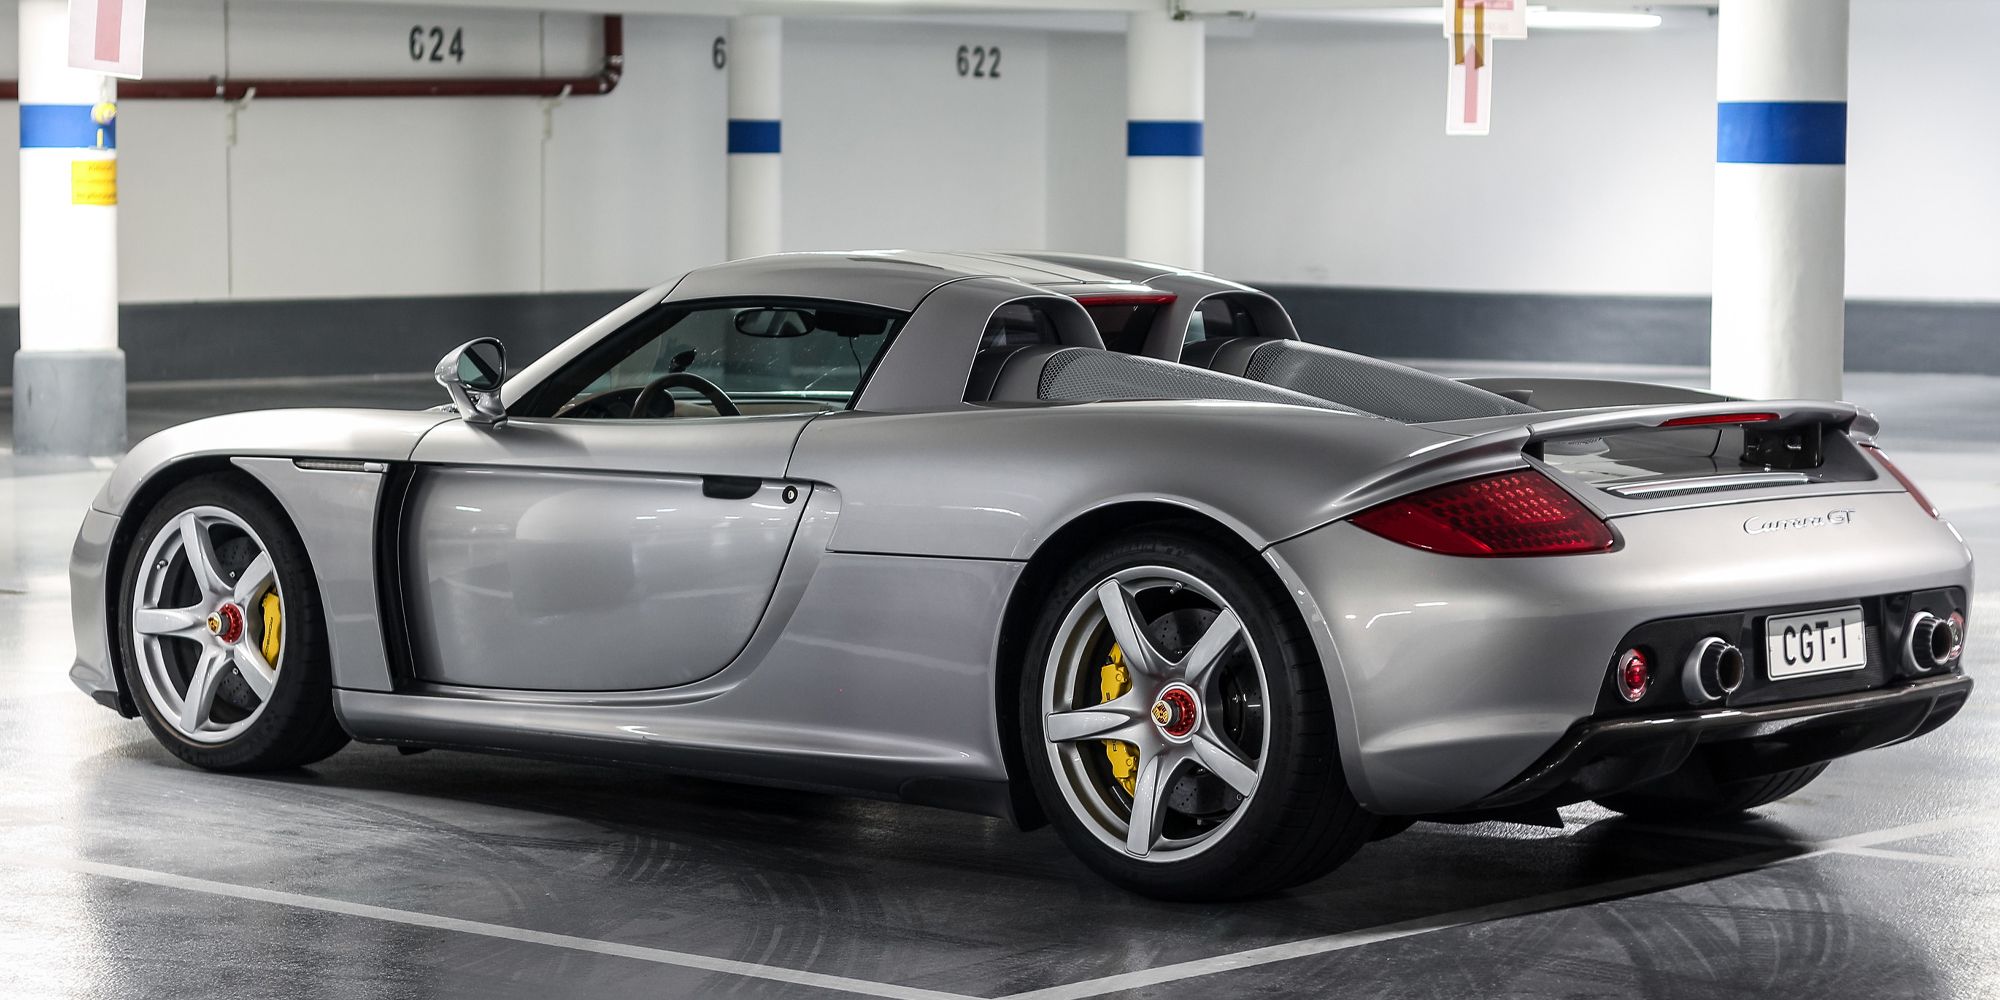 Rear 3/4 view of the Carrera GT